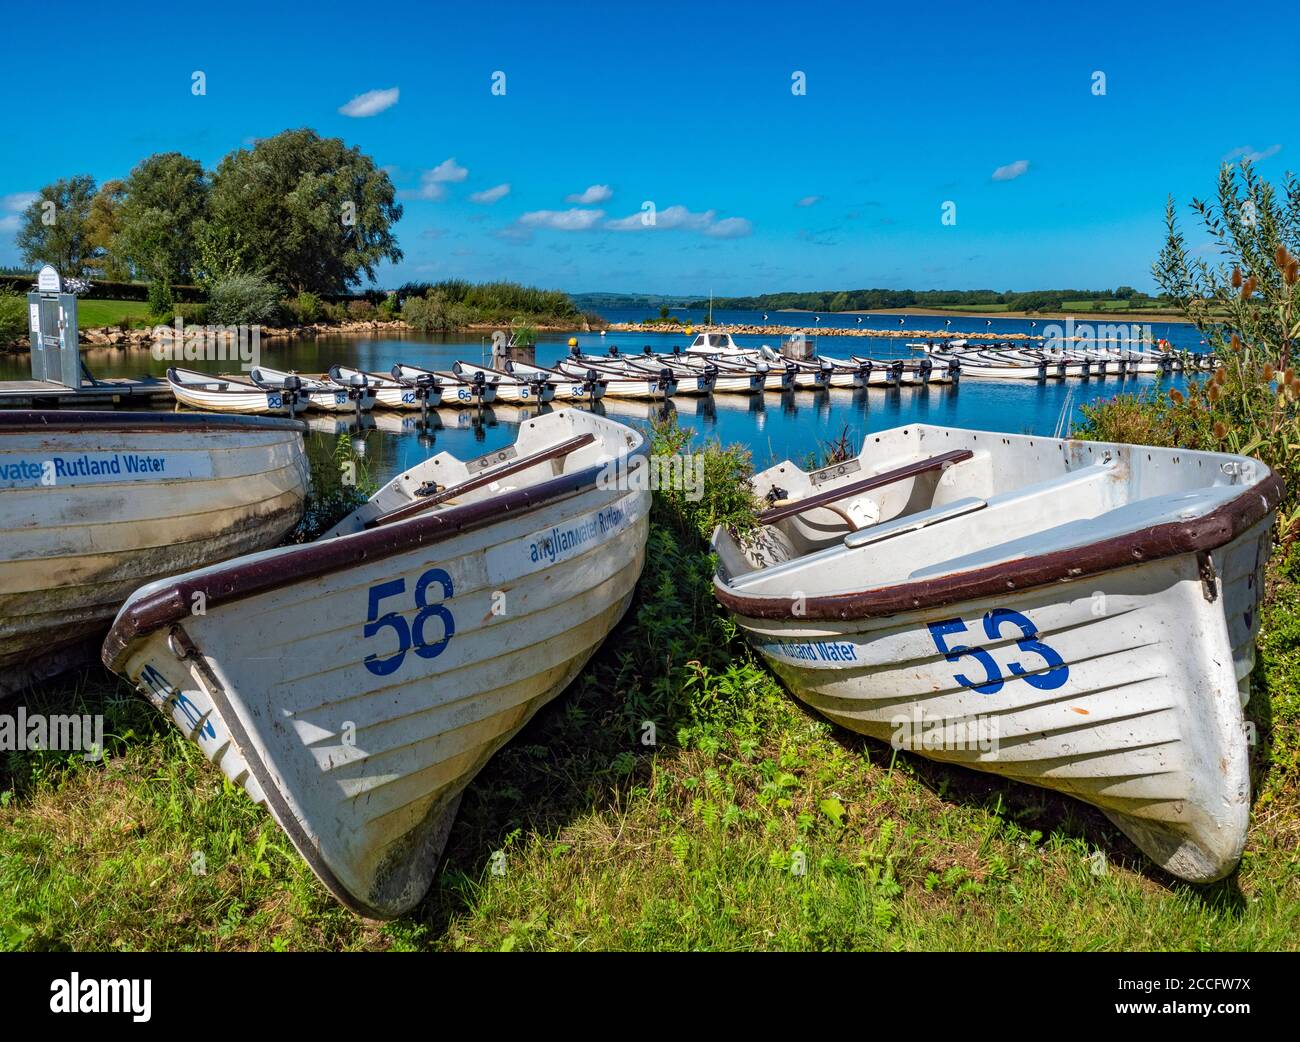 Numbered boats on land, with a line of motor boats behind on Rutland Water – a reservoir, artificial lake and nature reserve in Rutland, England, UK. Stock Photo